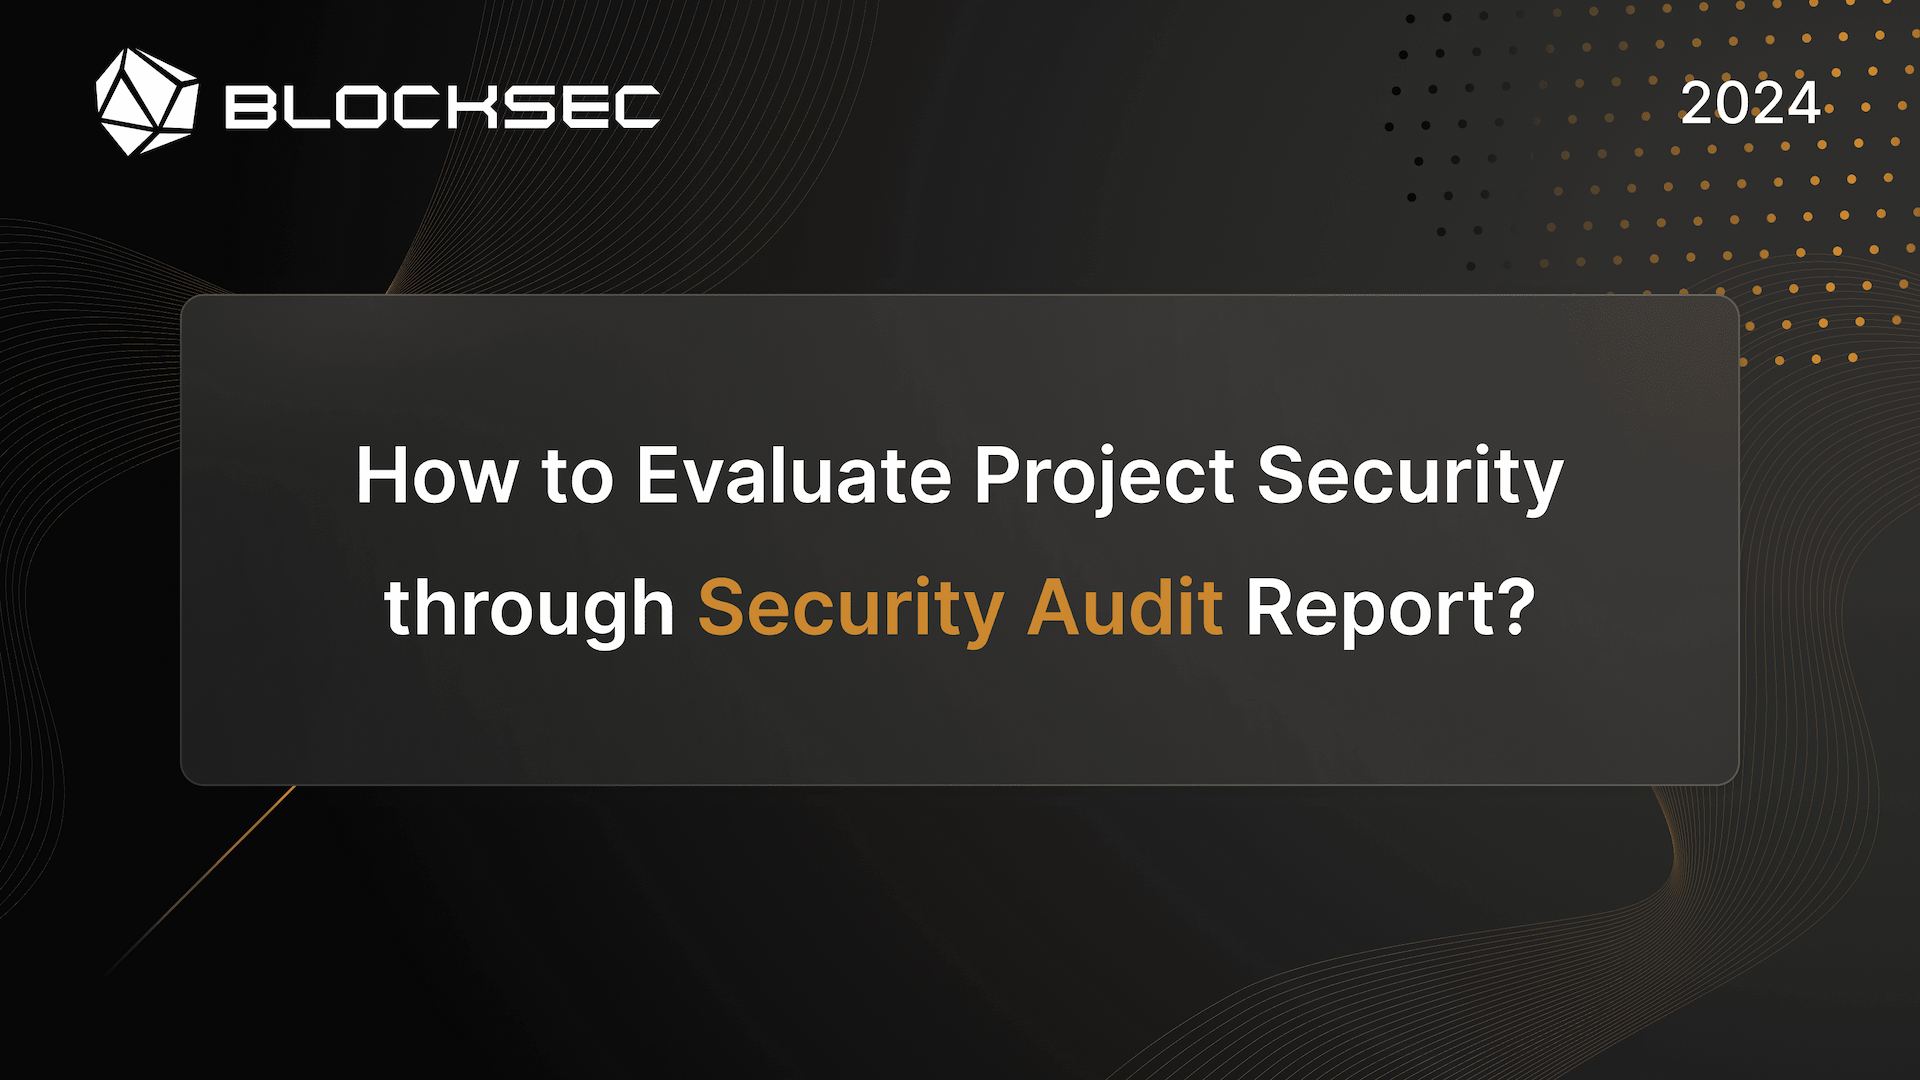 How to Evaluate Project Security through Security Audit Report?